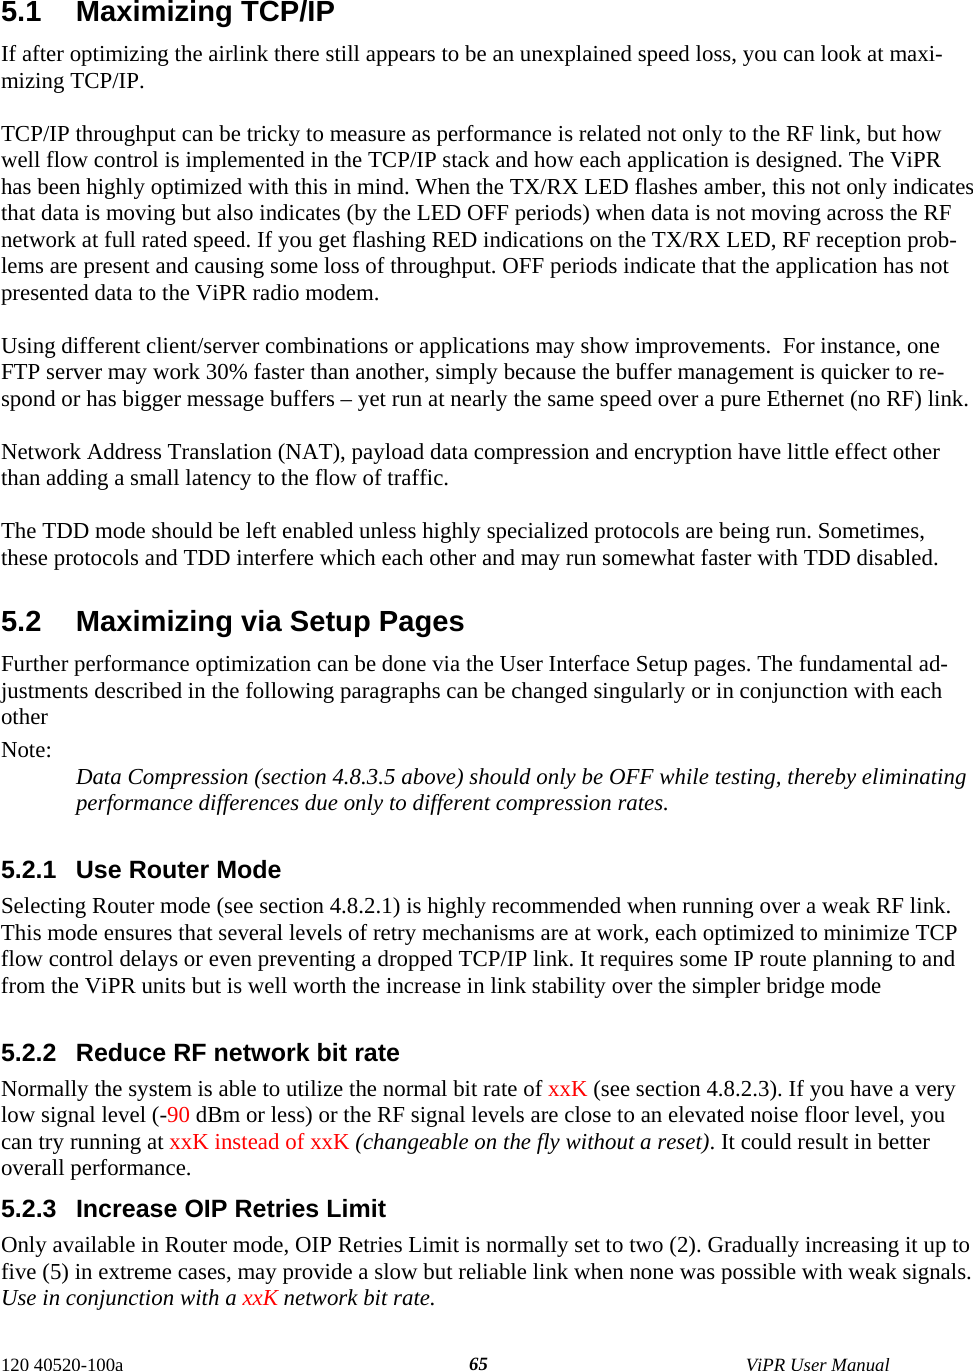  120 40520-100a    ViPR User Manual  655.1 Maximizing TCP/IP If after optimizing the airlink there still appears to be an unexplained speed loss, you can look at maxi-mizing TCP/IP.   TCP/IP throughput can be tricky to measure as performance is related not only to the RF link, but how well flow control is implemented in the TCP/IP stack and how each application is designed. The ViPR has been highly optimized with this in mind. When the TX/RX LED flashes amber, this not only indicates that data is moving but also indicates (by the LED OFF periods) when data is not moving across the RF network at full rated speed. If you get flashing RED indications on the TX/RX LED, RF reception prob-lems are present and causing some loss of throughput. OFF periods indicate that the application has not presented data to the ViPR radio modem.  Using different client/server combinations or applications may show improvements.  For instance, one FTP server may work 30% faster than another, simply because the buffer management is quicker to re-spond or has bigger message buffers – yet run at nearly the same speed over a pure Ethernet (no RF) link.  Network Address Translation (NAT), payload data compression and encryption have little effect other than adding a small latency to the flow of traffic.  The TDD mode should be left enabled unless highly specialized protocols are being run. Sometimes, these protocols and TDD interfere which each other and may run somewhat faster with TDD disabled.  5.2  Maximizing via Setup Pages Further performance optimization can be done via the User Interface Setup pages. The fundamental ad-justments described in the following paragraphs can be changed singularly or in conjunction with each other  Note:  Data Compression (section 4.8.3.5 above) should only be OFF while testing, thereby eliminating performance differences due only to different compression rates.  5.2.1  Use Router Mode Selecting Router mode (see section 4.8.2.1) is highly recommended when running over a weak RF link. This mode ensures that several levels of retry mechanisms are at work, each optimized to minimize TCP flow control delays or even preventing a dropped TCP/IP link. It requires some IP route planning to and from the ViPR units but is well worth the increase in link stability over the simpler bridge mode  5.2.2  Reduce RF network bit rate Normally the system is able to utilize the normal bit rate of xxK (see section 4.8.2.3). If you have a very low signal level (-90 dBm or less) or the RF signal levels are close to an elevated noise floor level, you can try running at xxK instead of xxK (changeable on the fly without a reset). It could result in better overall performance. 5.2.3  Increase OIP Retries Limit Only available in Router mode, OIP Retries Limit is normally set to two (2). Gradually increasing it up to five (5) in extreme cases, may provide a slow but reliable link when none was possible with weak signals. Use in conjunction with a xxK network bit rate. 